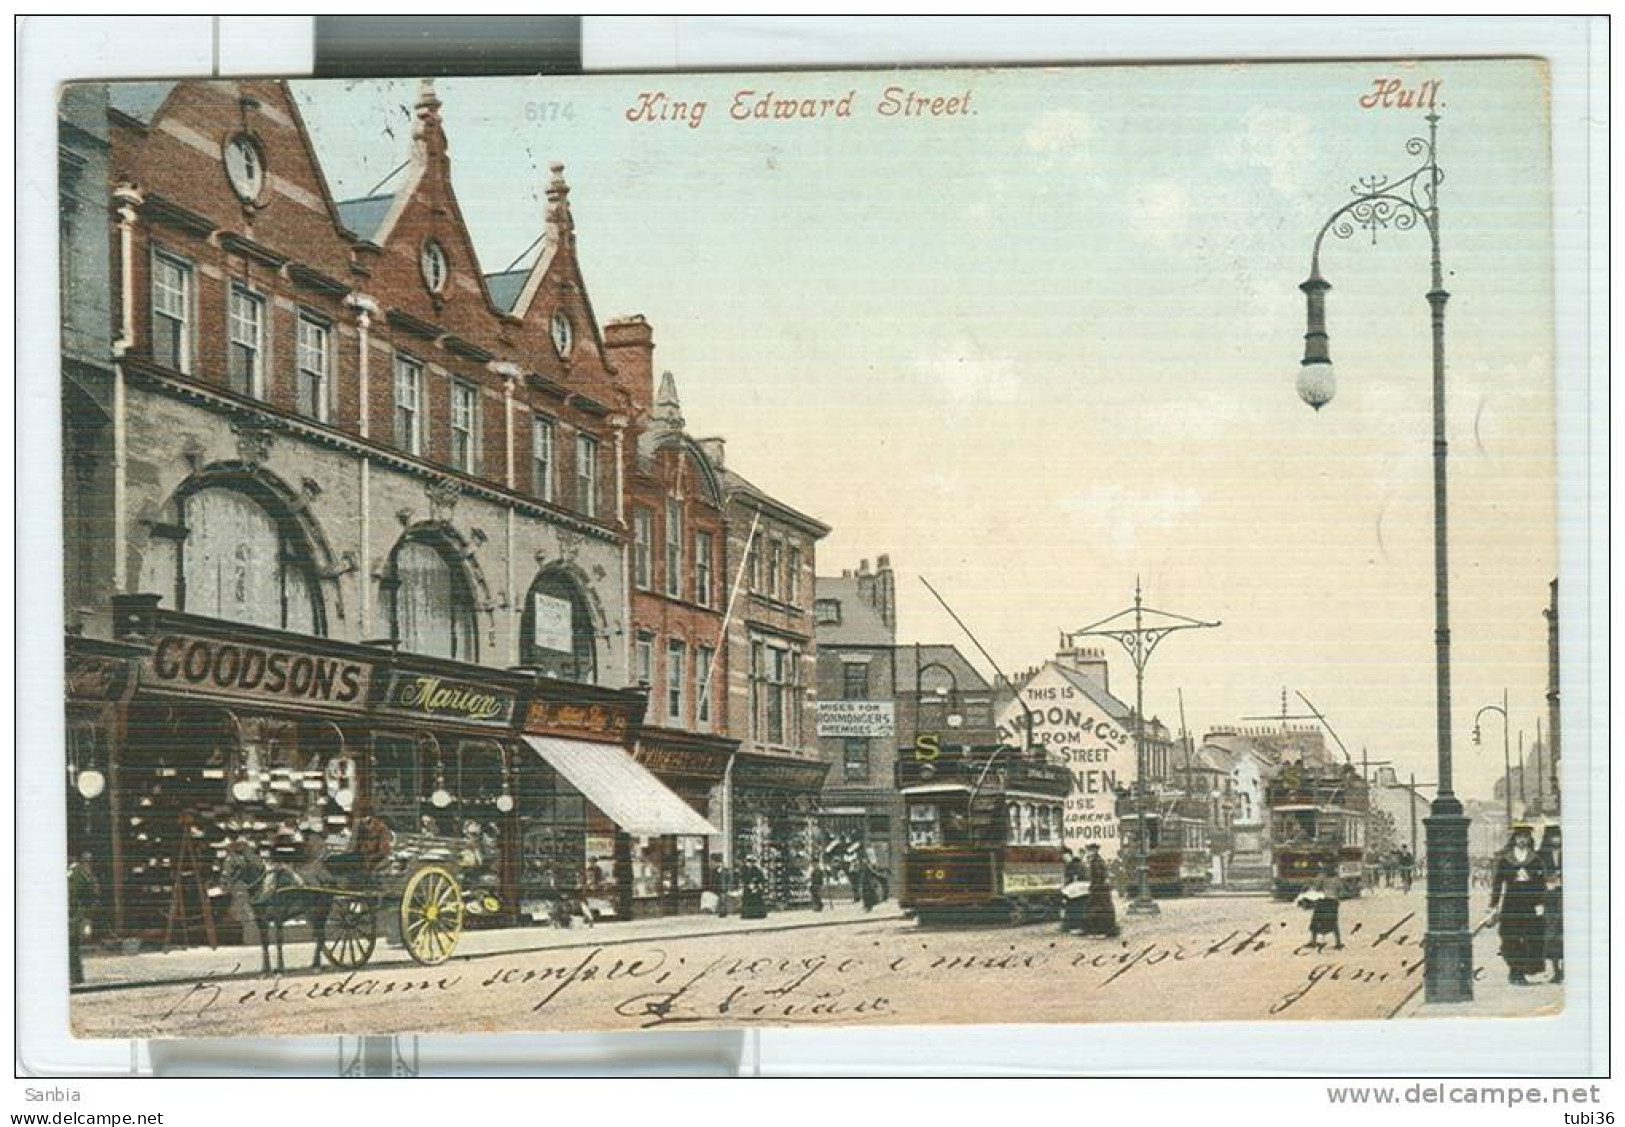 HULL , King Edward Street . - POSTCARD, COLORS, ANIMATED, USED, 1905 DESTINATION ITALY, SMALL SIZE 9 X 14, - Hull